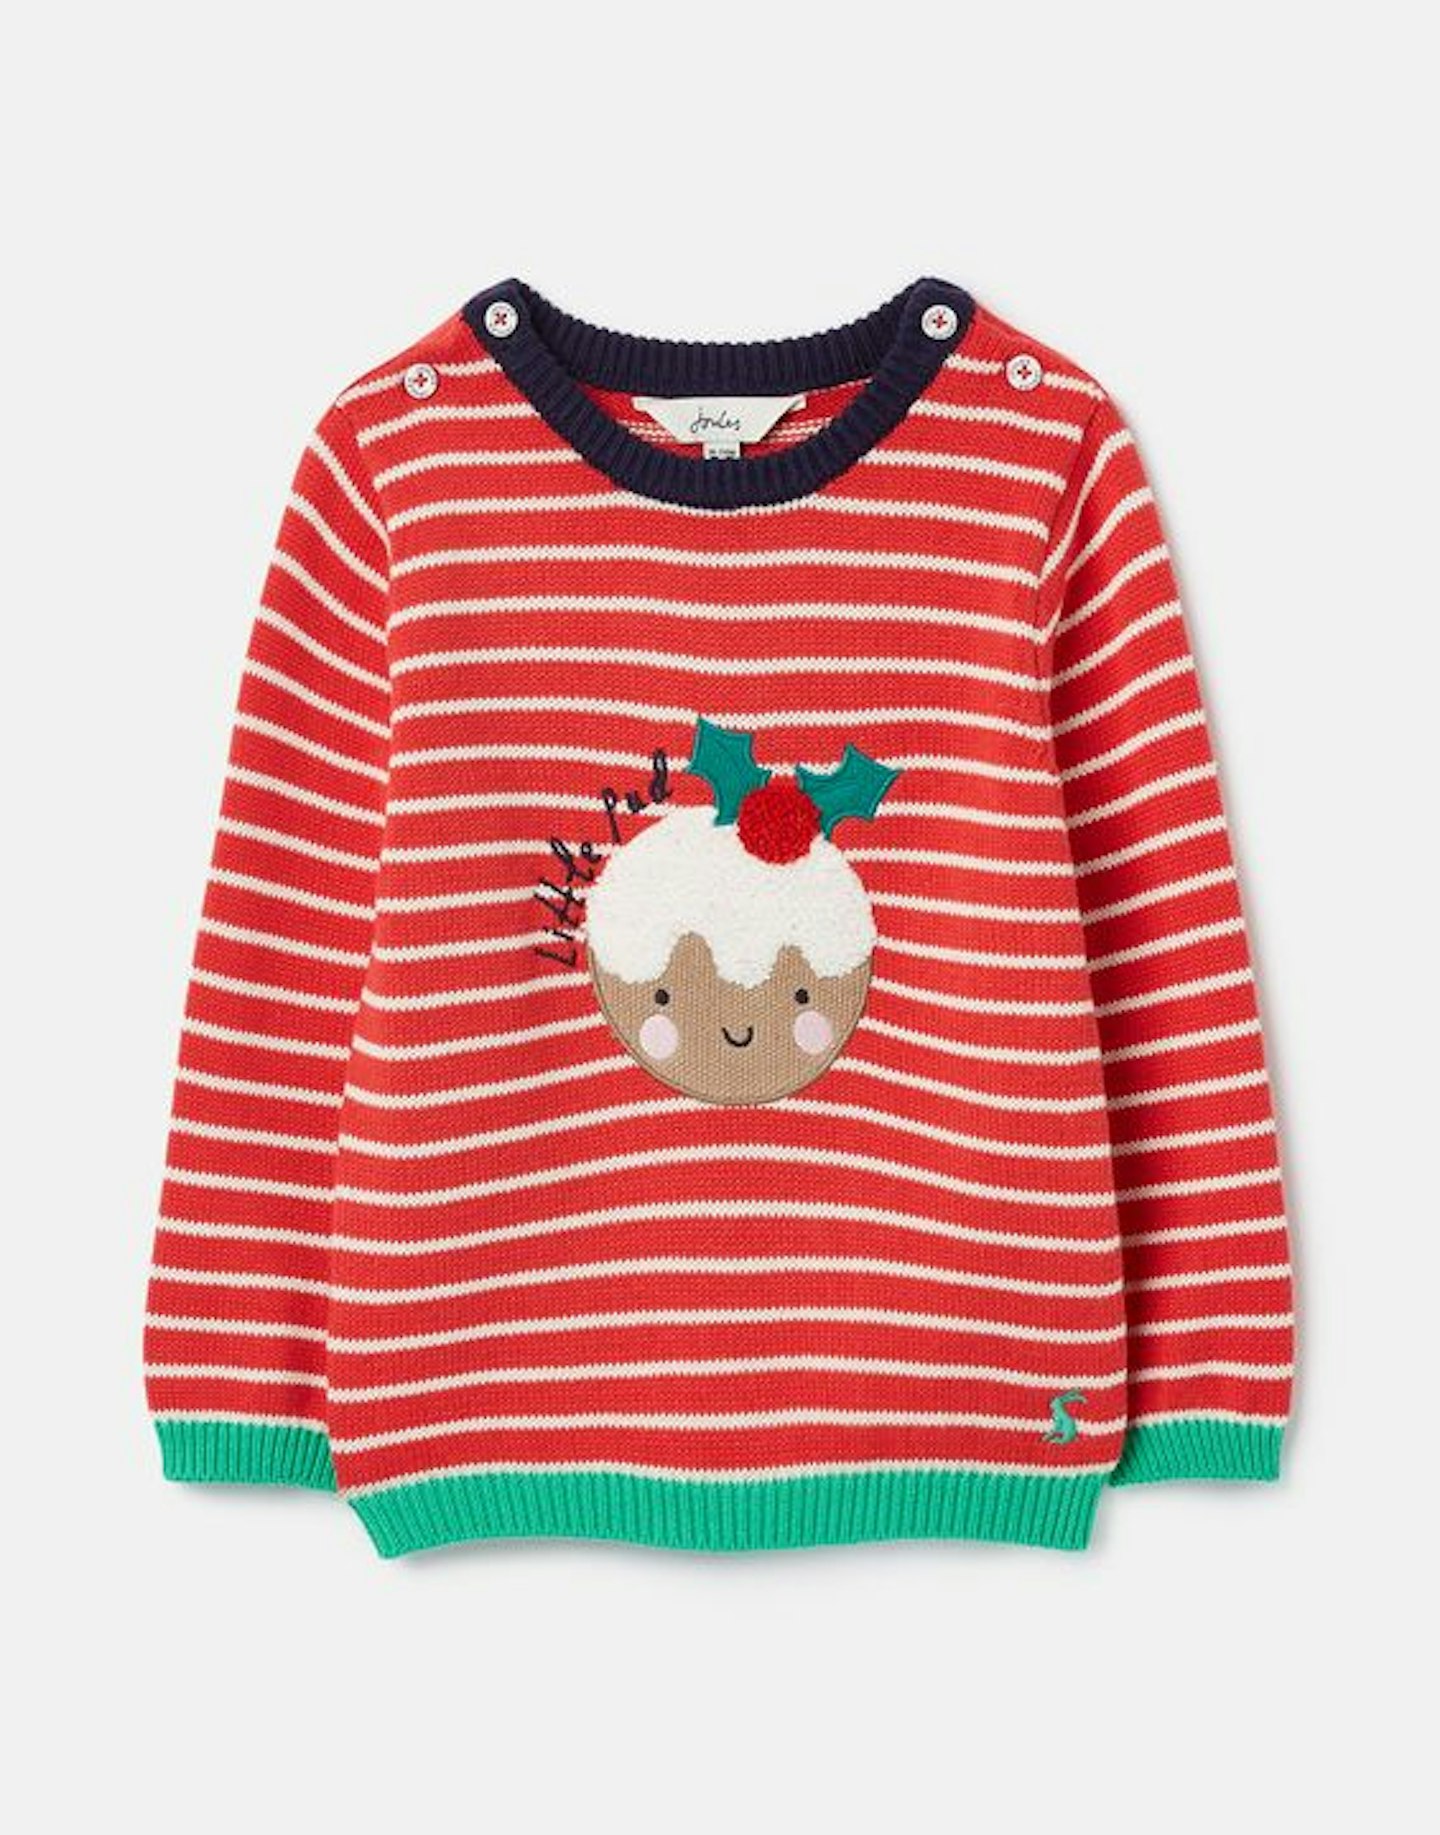 Joules, Cracking Festive Knitted Jumper